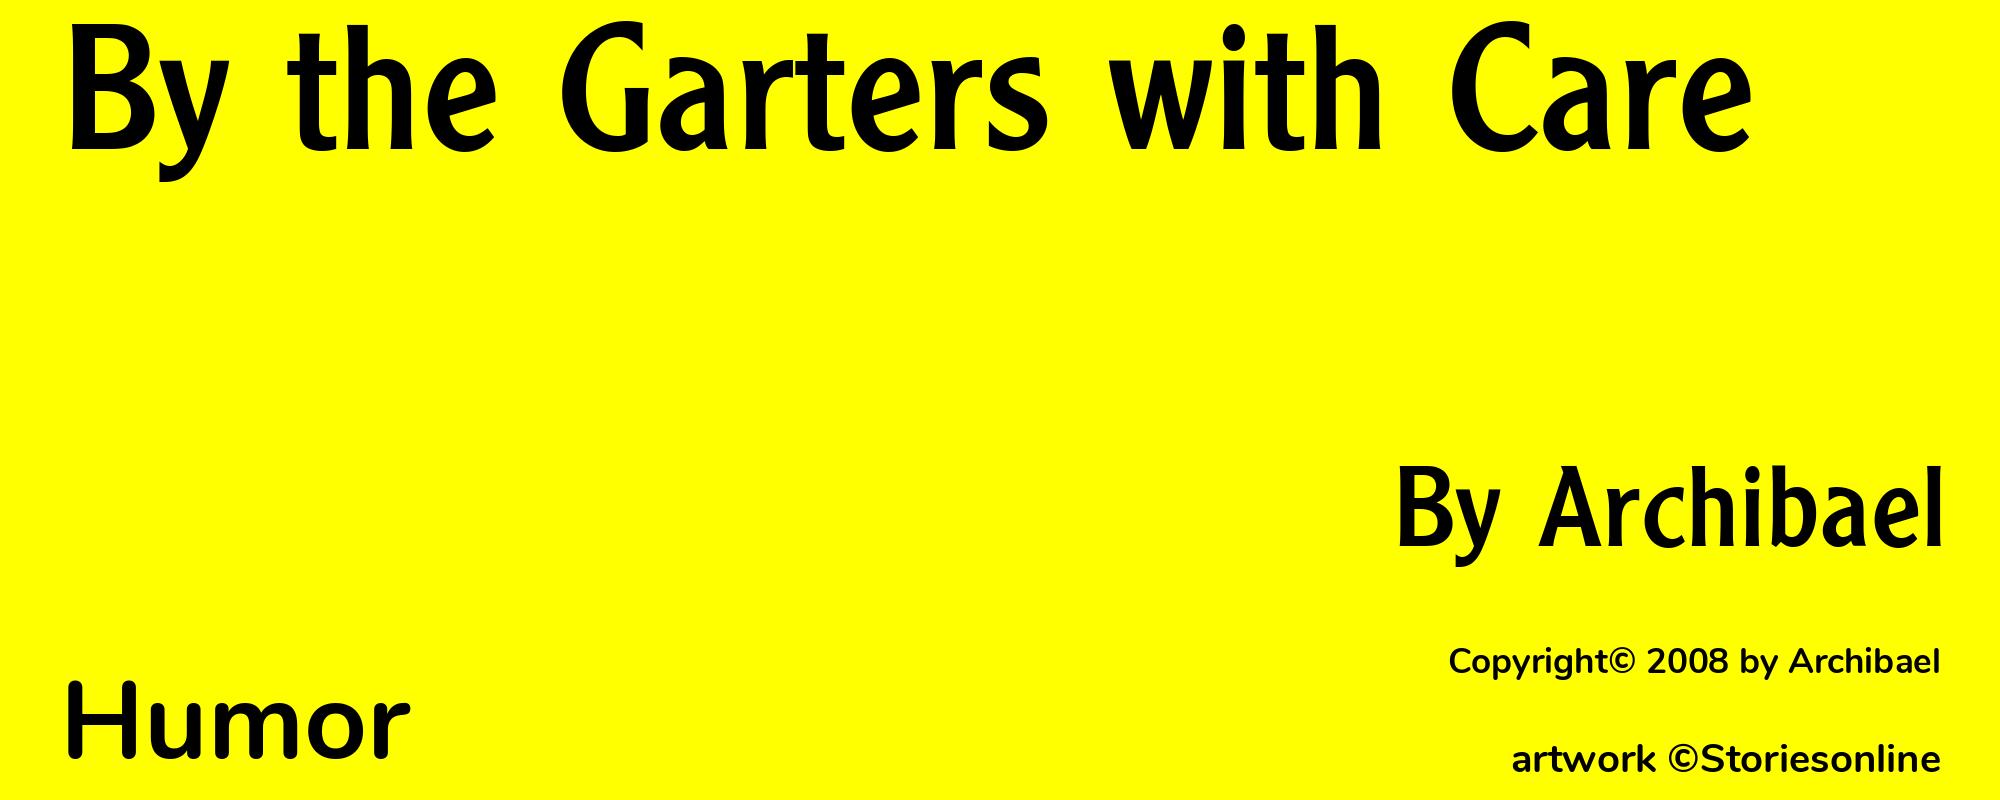 By the Garters with Care - Cover